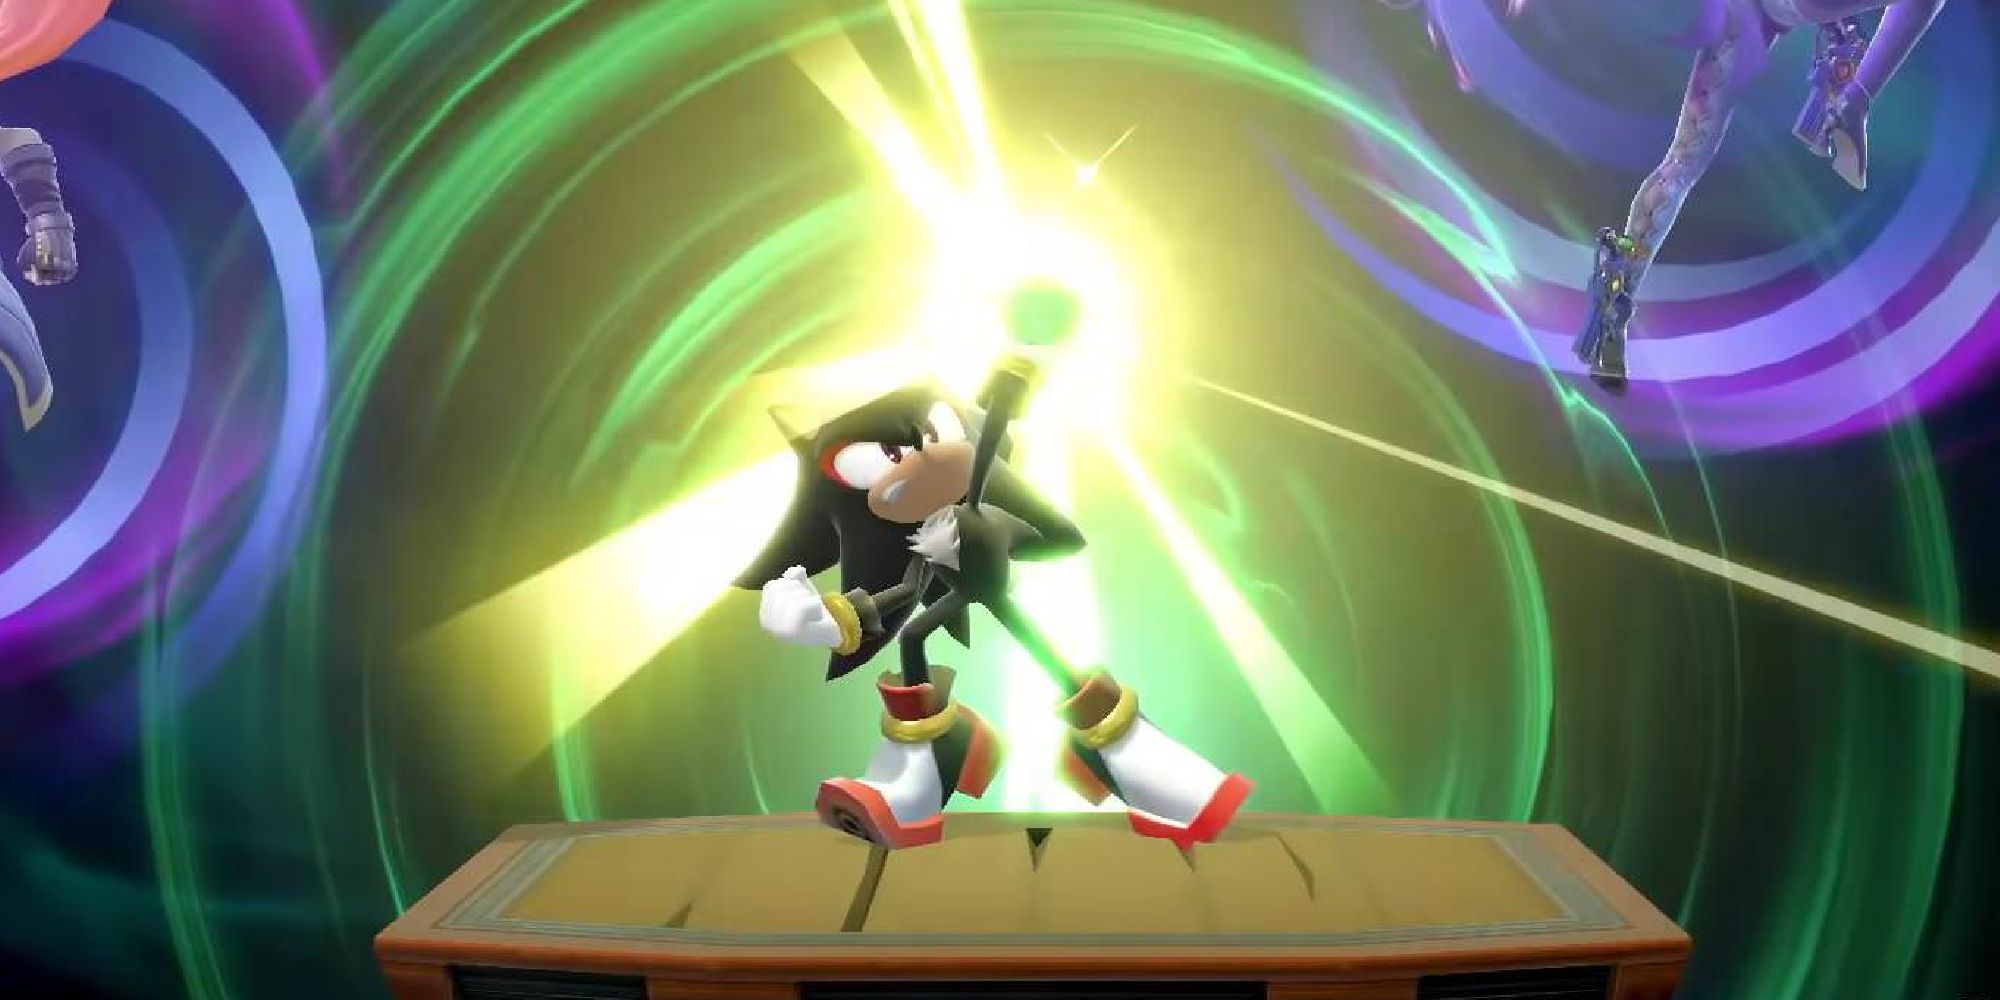 Shadow using Chaos Control in Smash Bros Ultimate